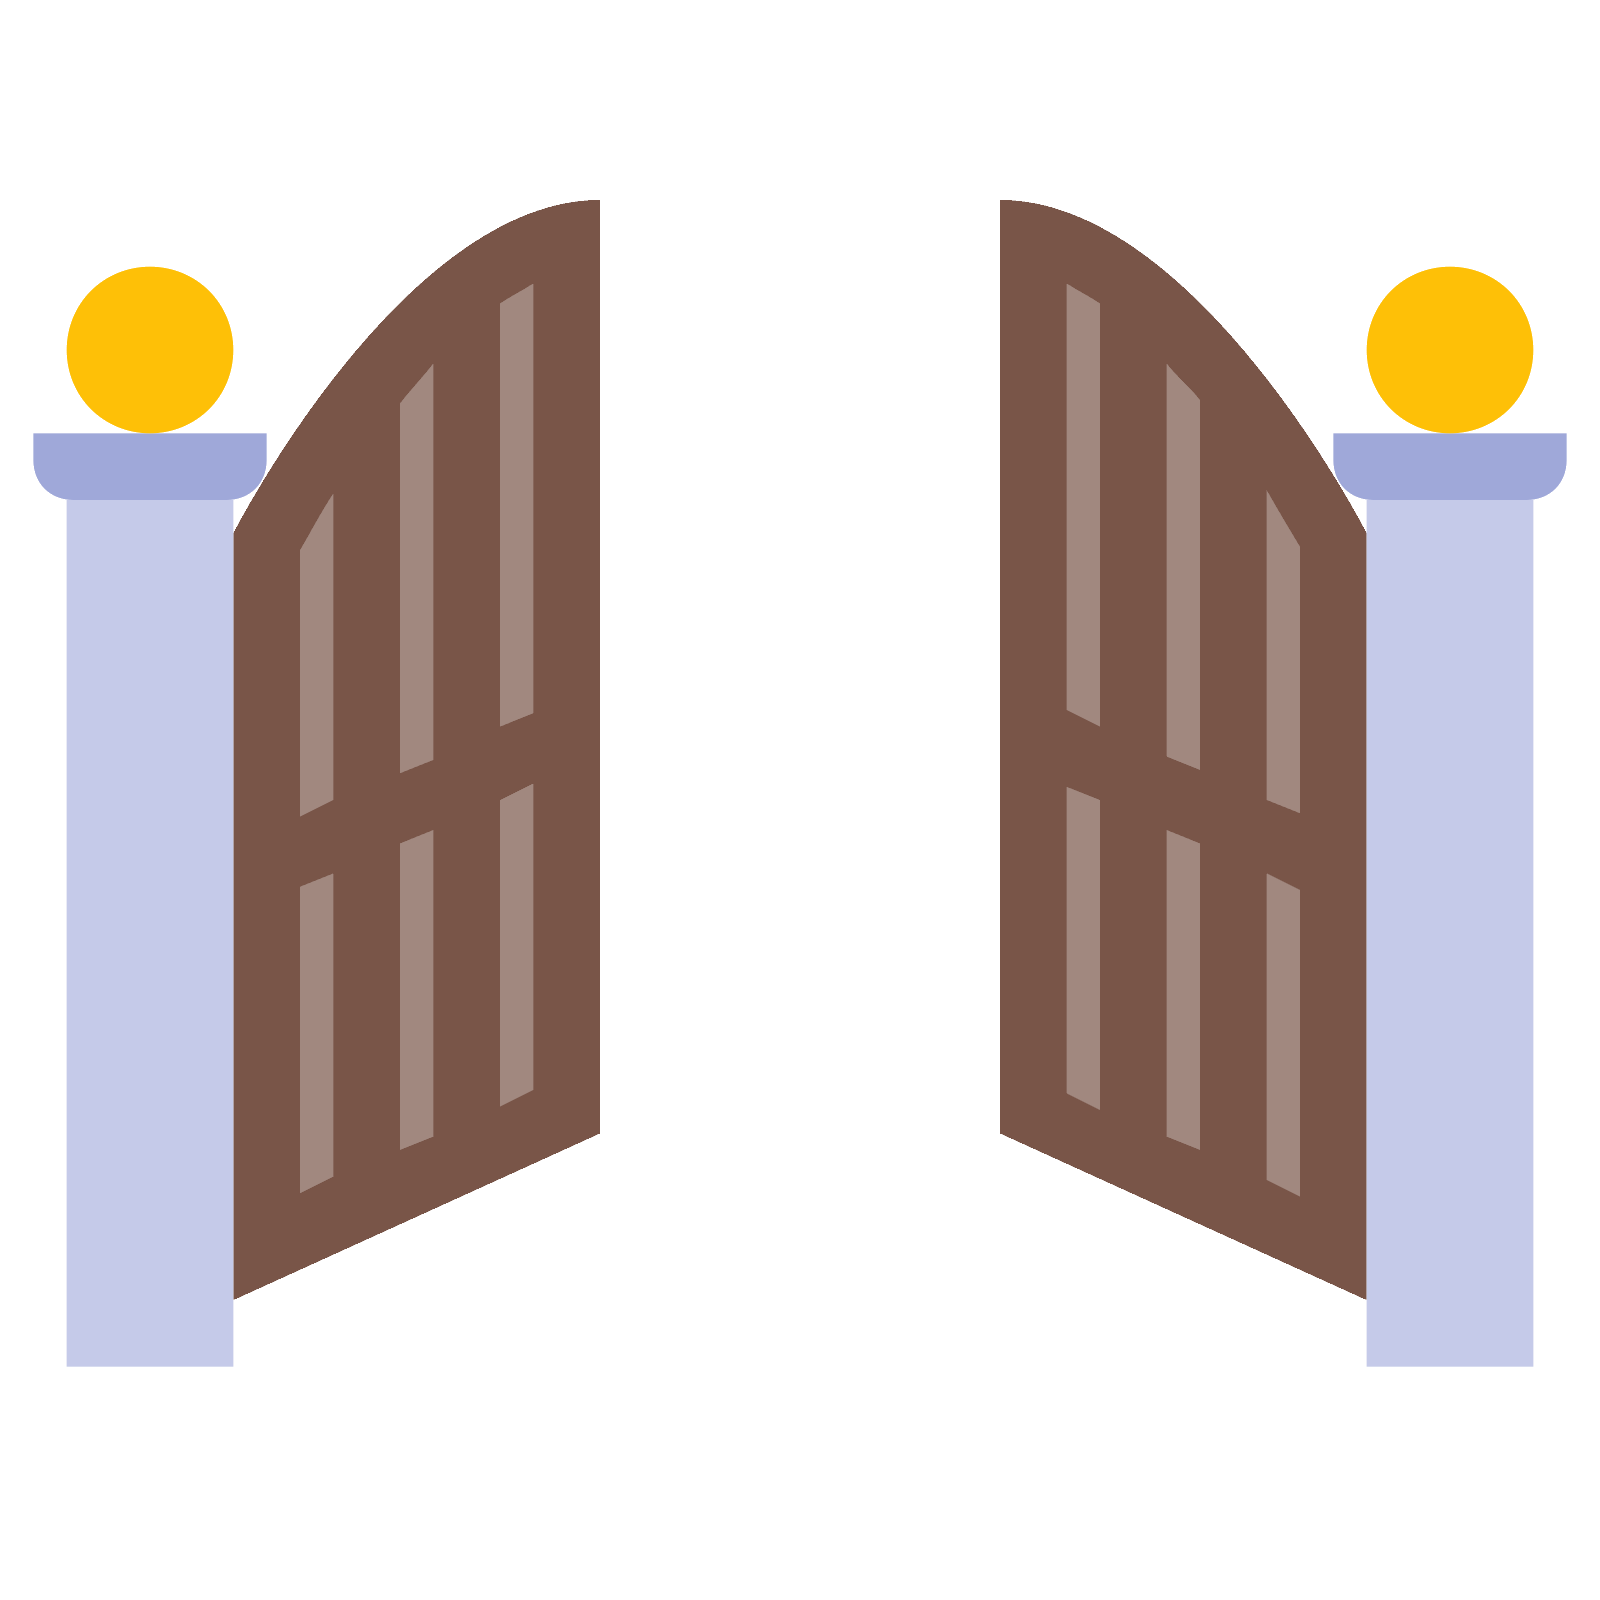 gate clipart entry gate